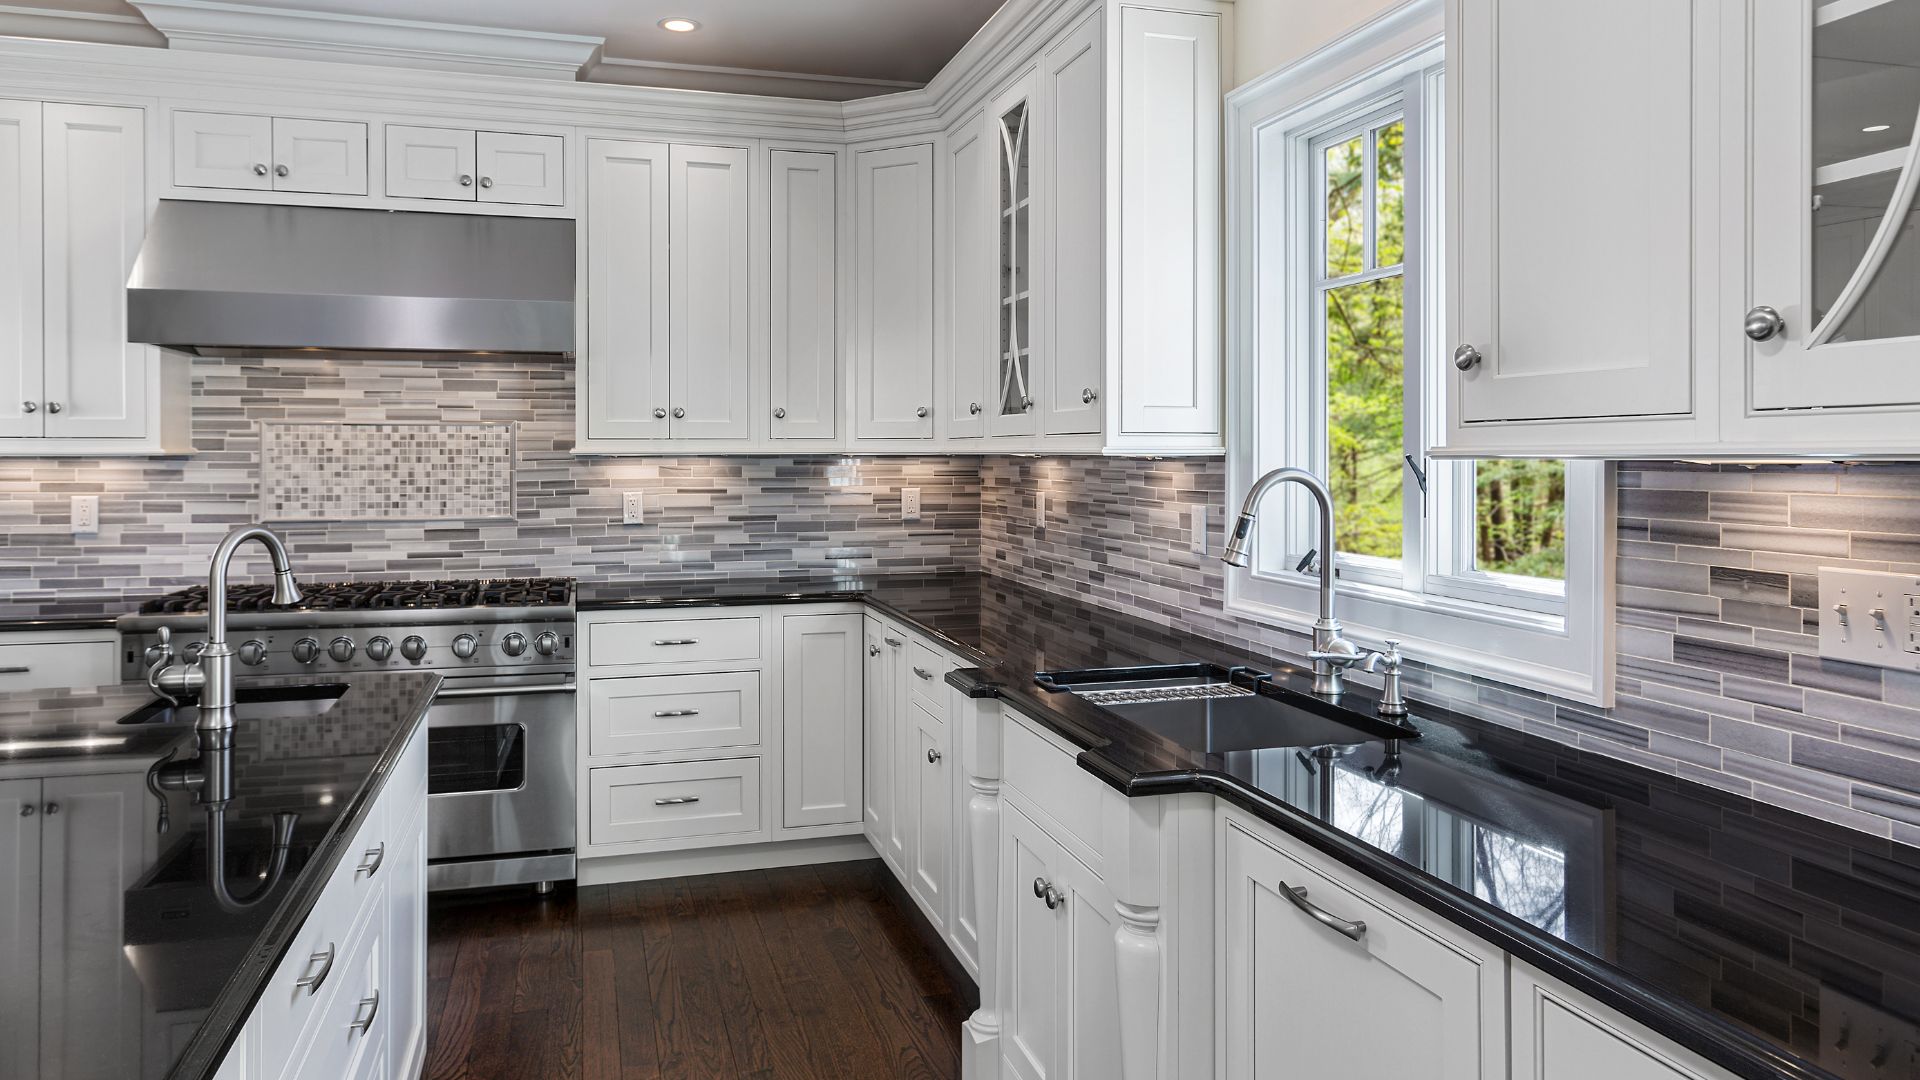 L Type kitchen with white shaker cabinets and black countertops